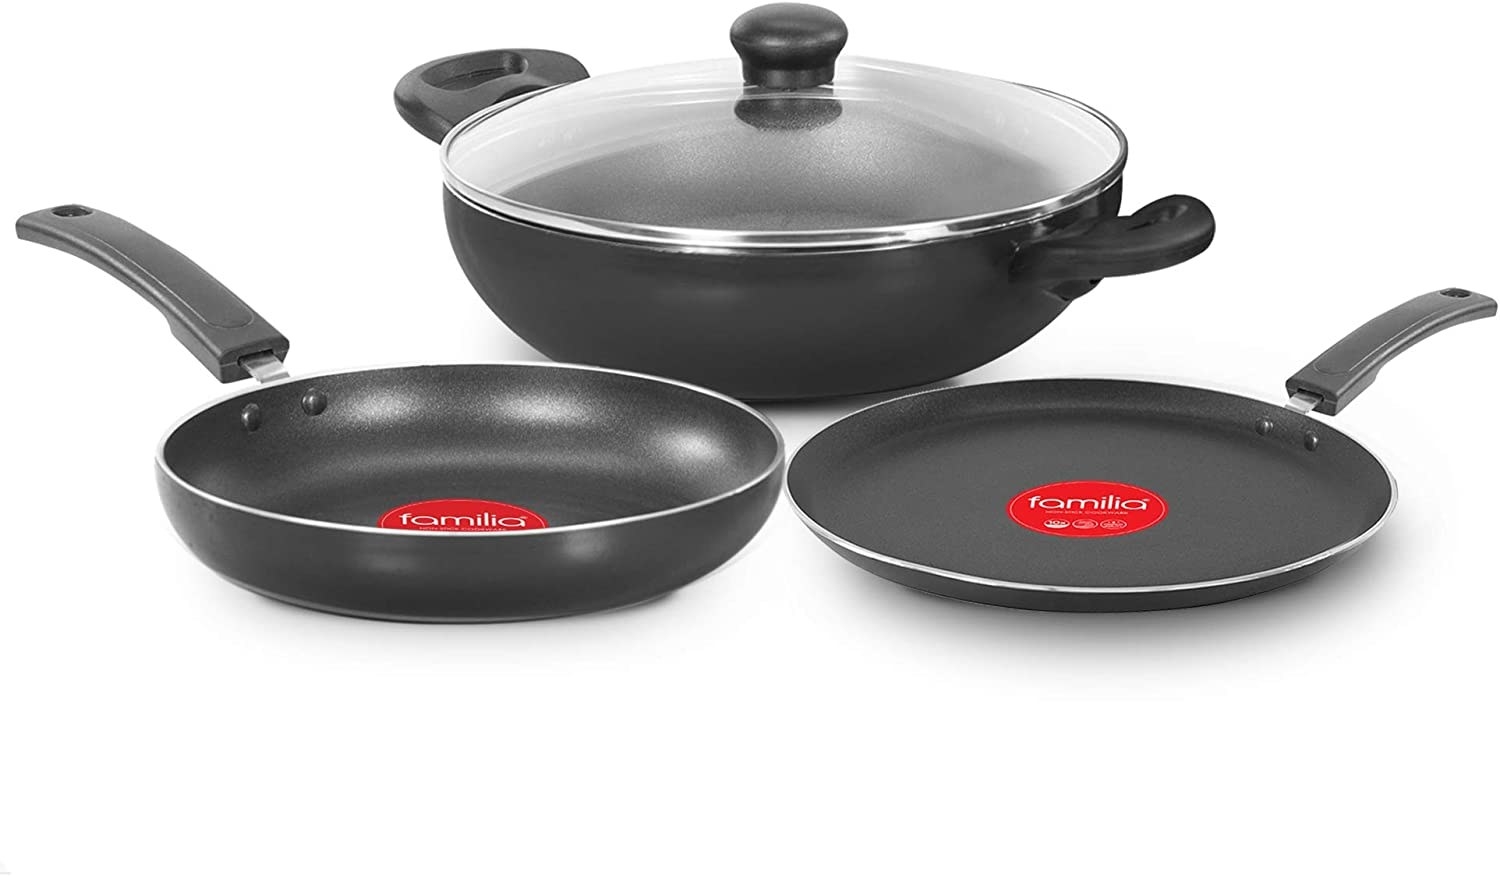 A nonstick cookware set. It includes two pans and a kadhaai.